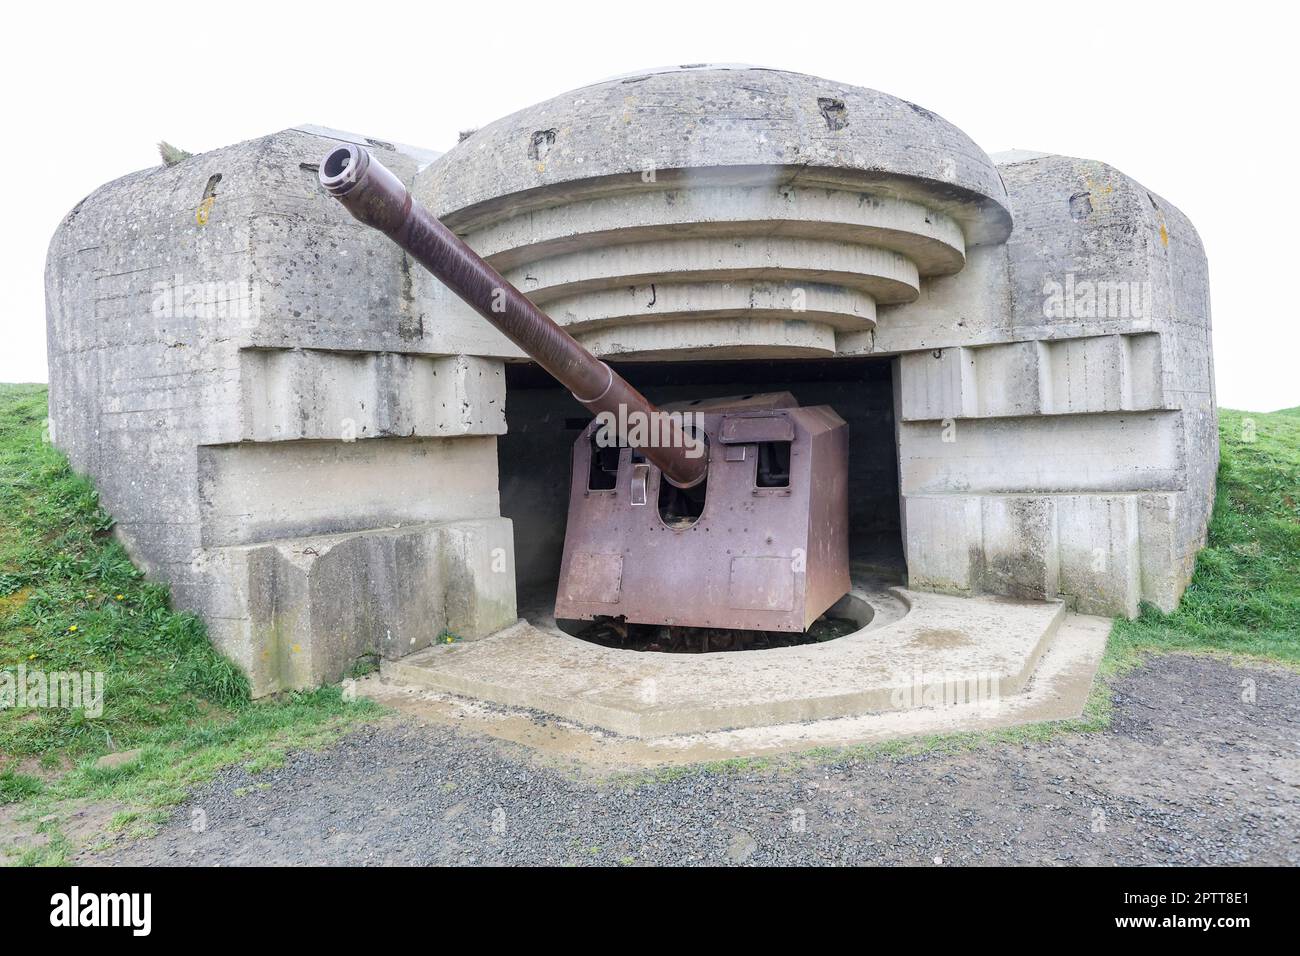 German,gun,gun emplacement,bunker,cannon,Atlantic Wall,defence,defences,battery,WW II,Second World War,beach,at, Longues-sur-Mer,Longues-sur-Mer gun battery,in,Normandy,Normandie,France,French,Europe,European, Stock Photo